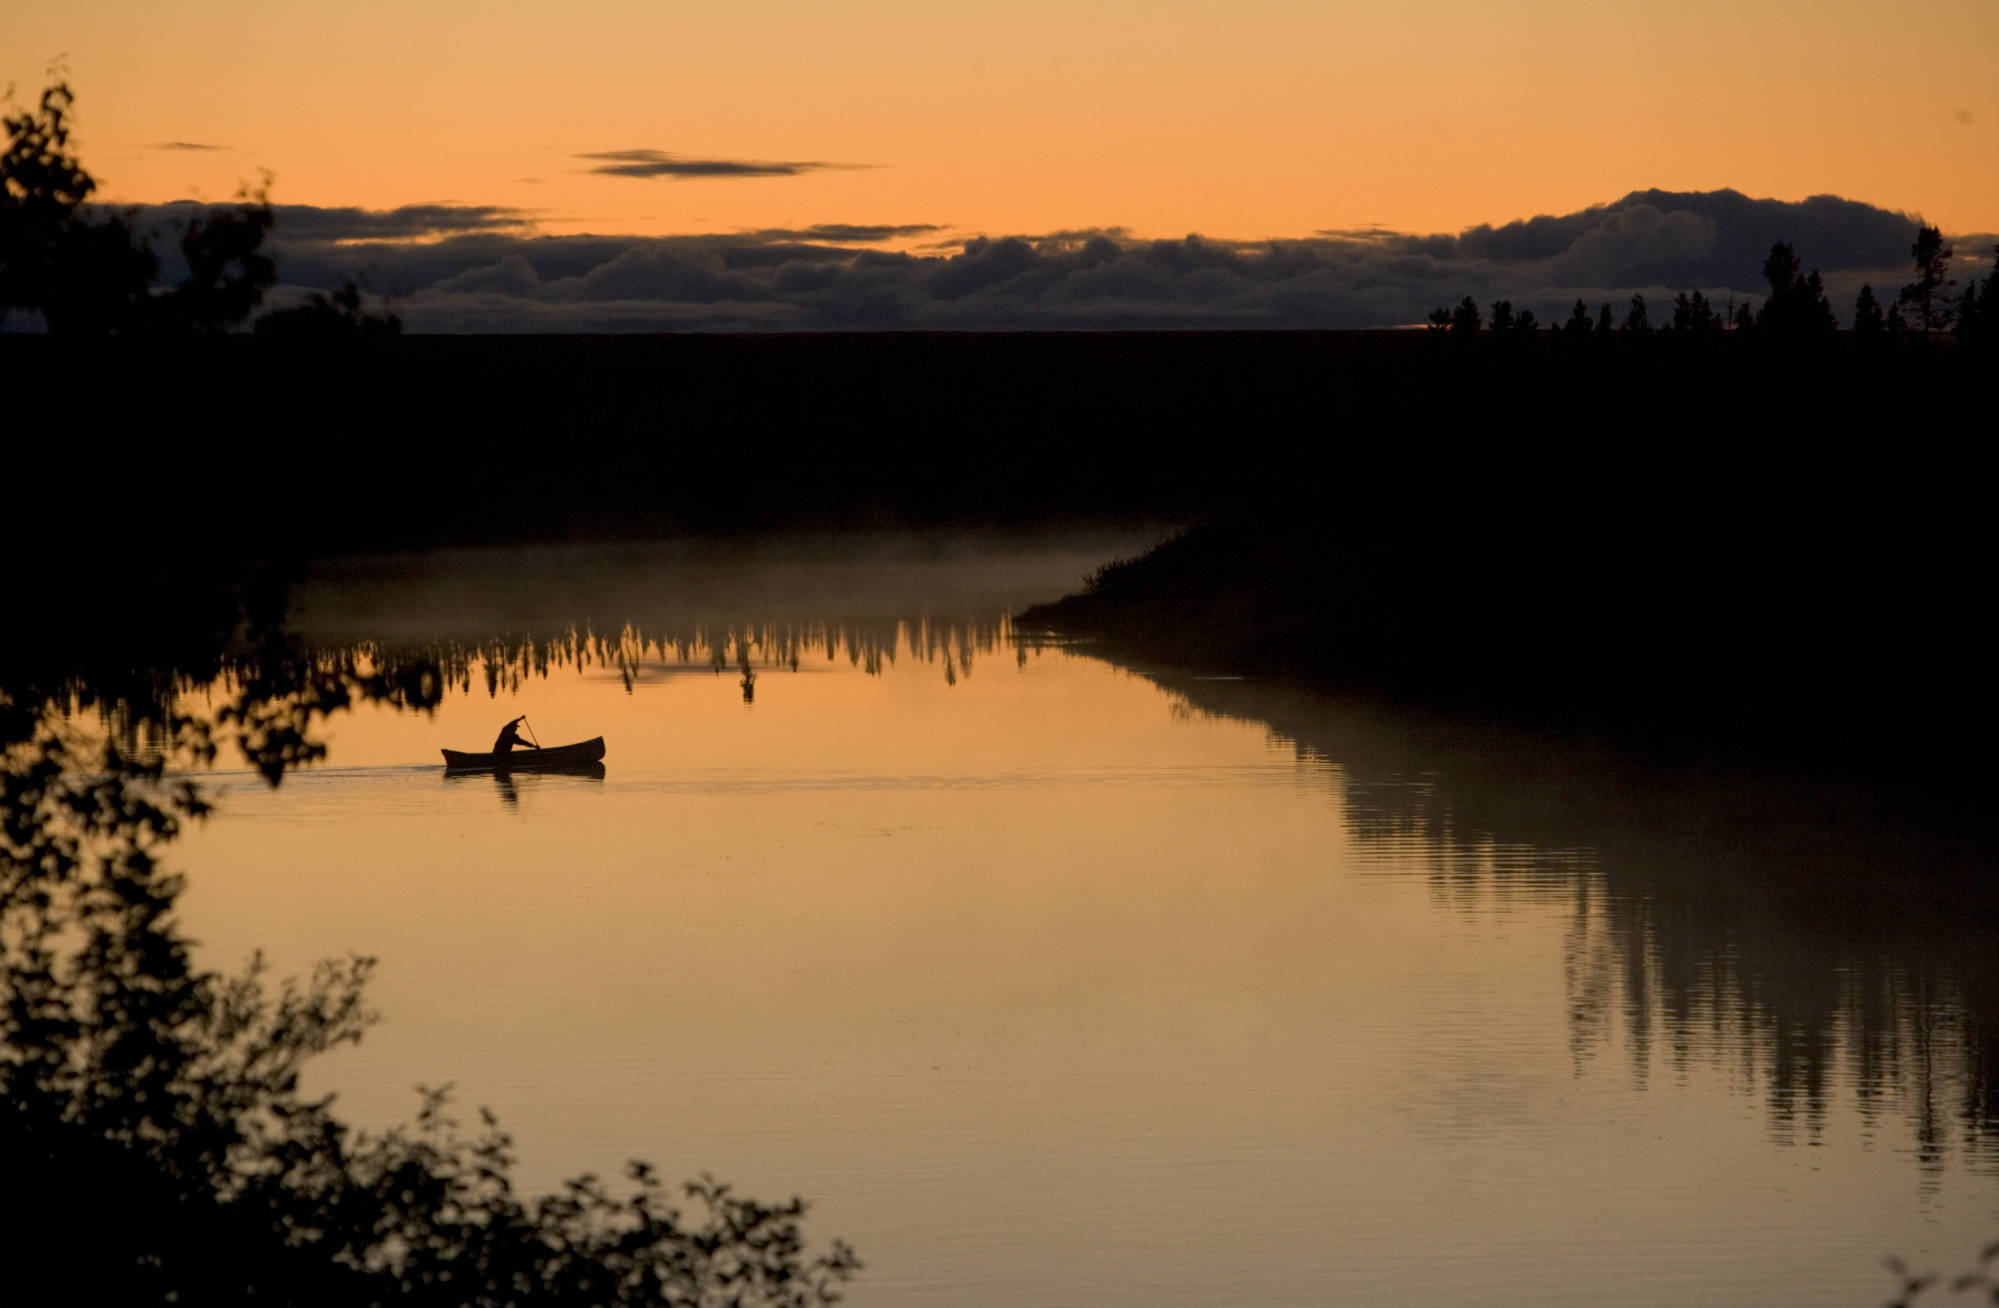 Silhouette of a paddler canoeing across a calm lake at sunrise or sunset